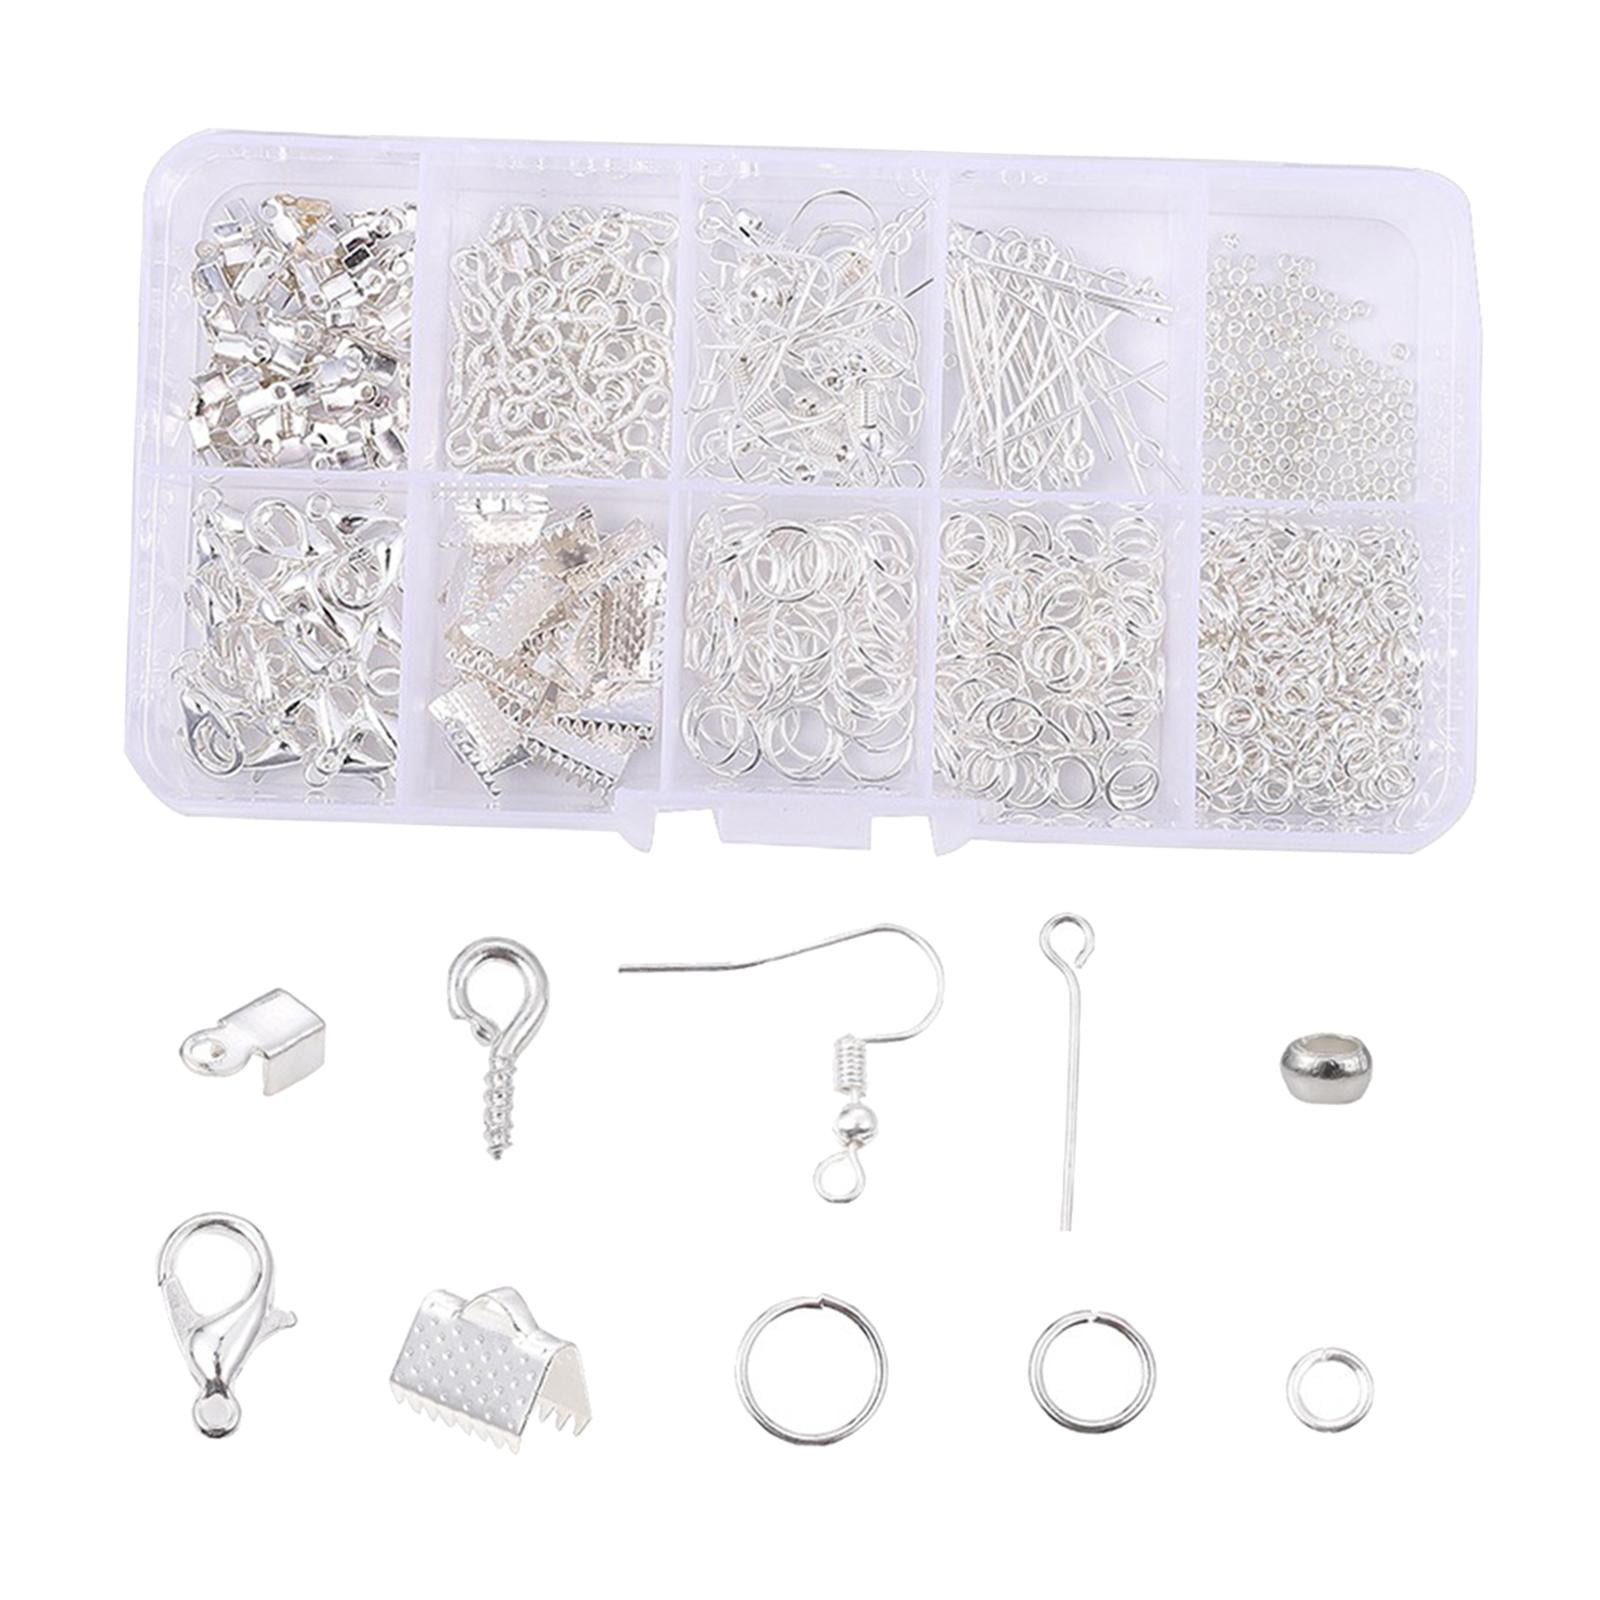 1set Jewelry Making Tools Clasp String Cap Ring Set Bracelet Necklace  Earrings DIY Parts 30027-29 